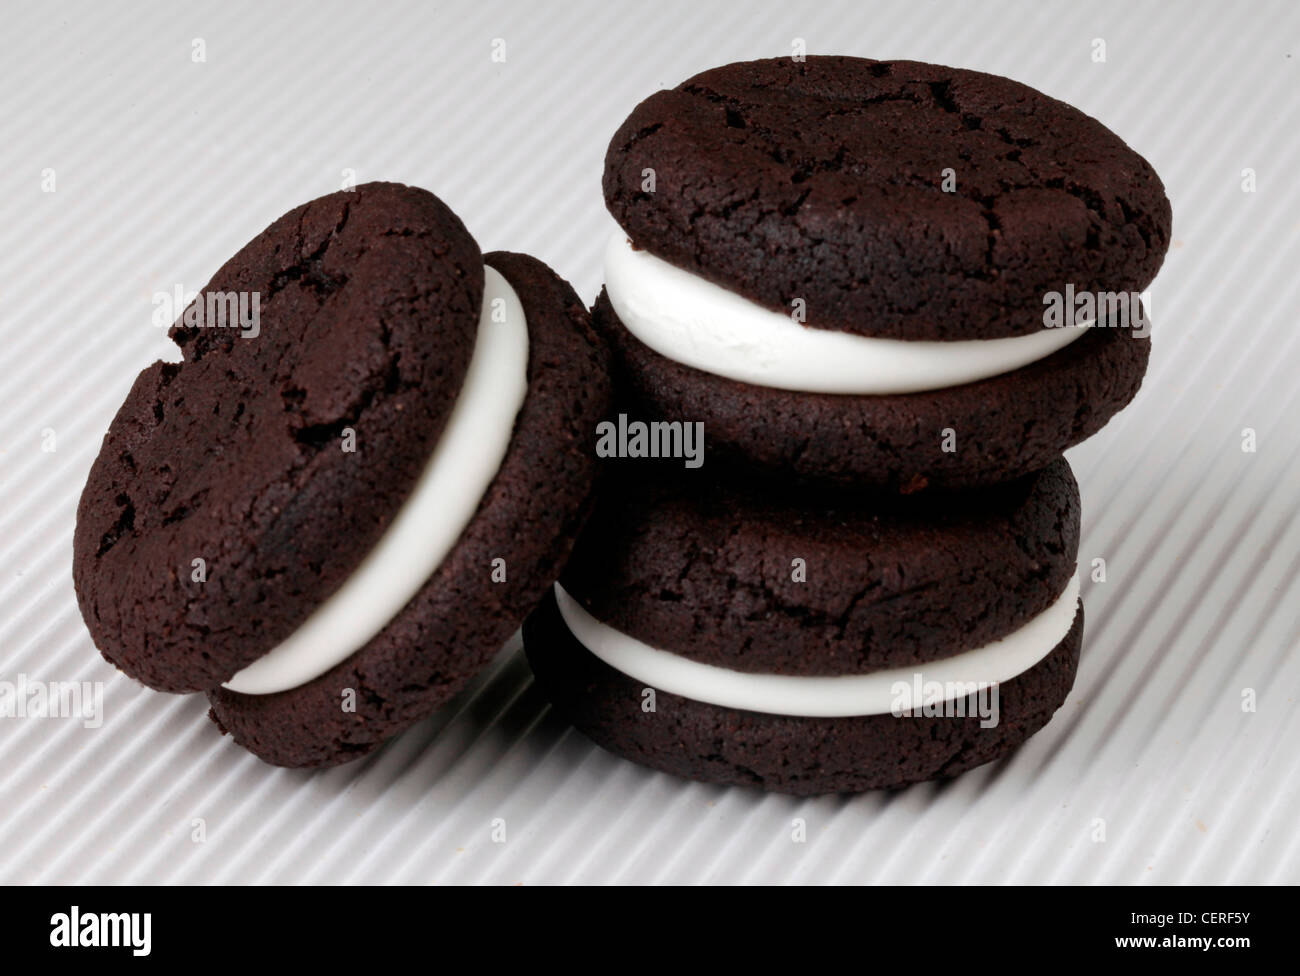 BISCUITS OREO Banque D'Images